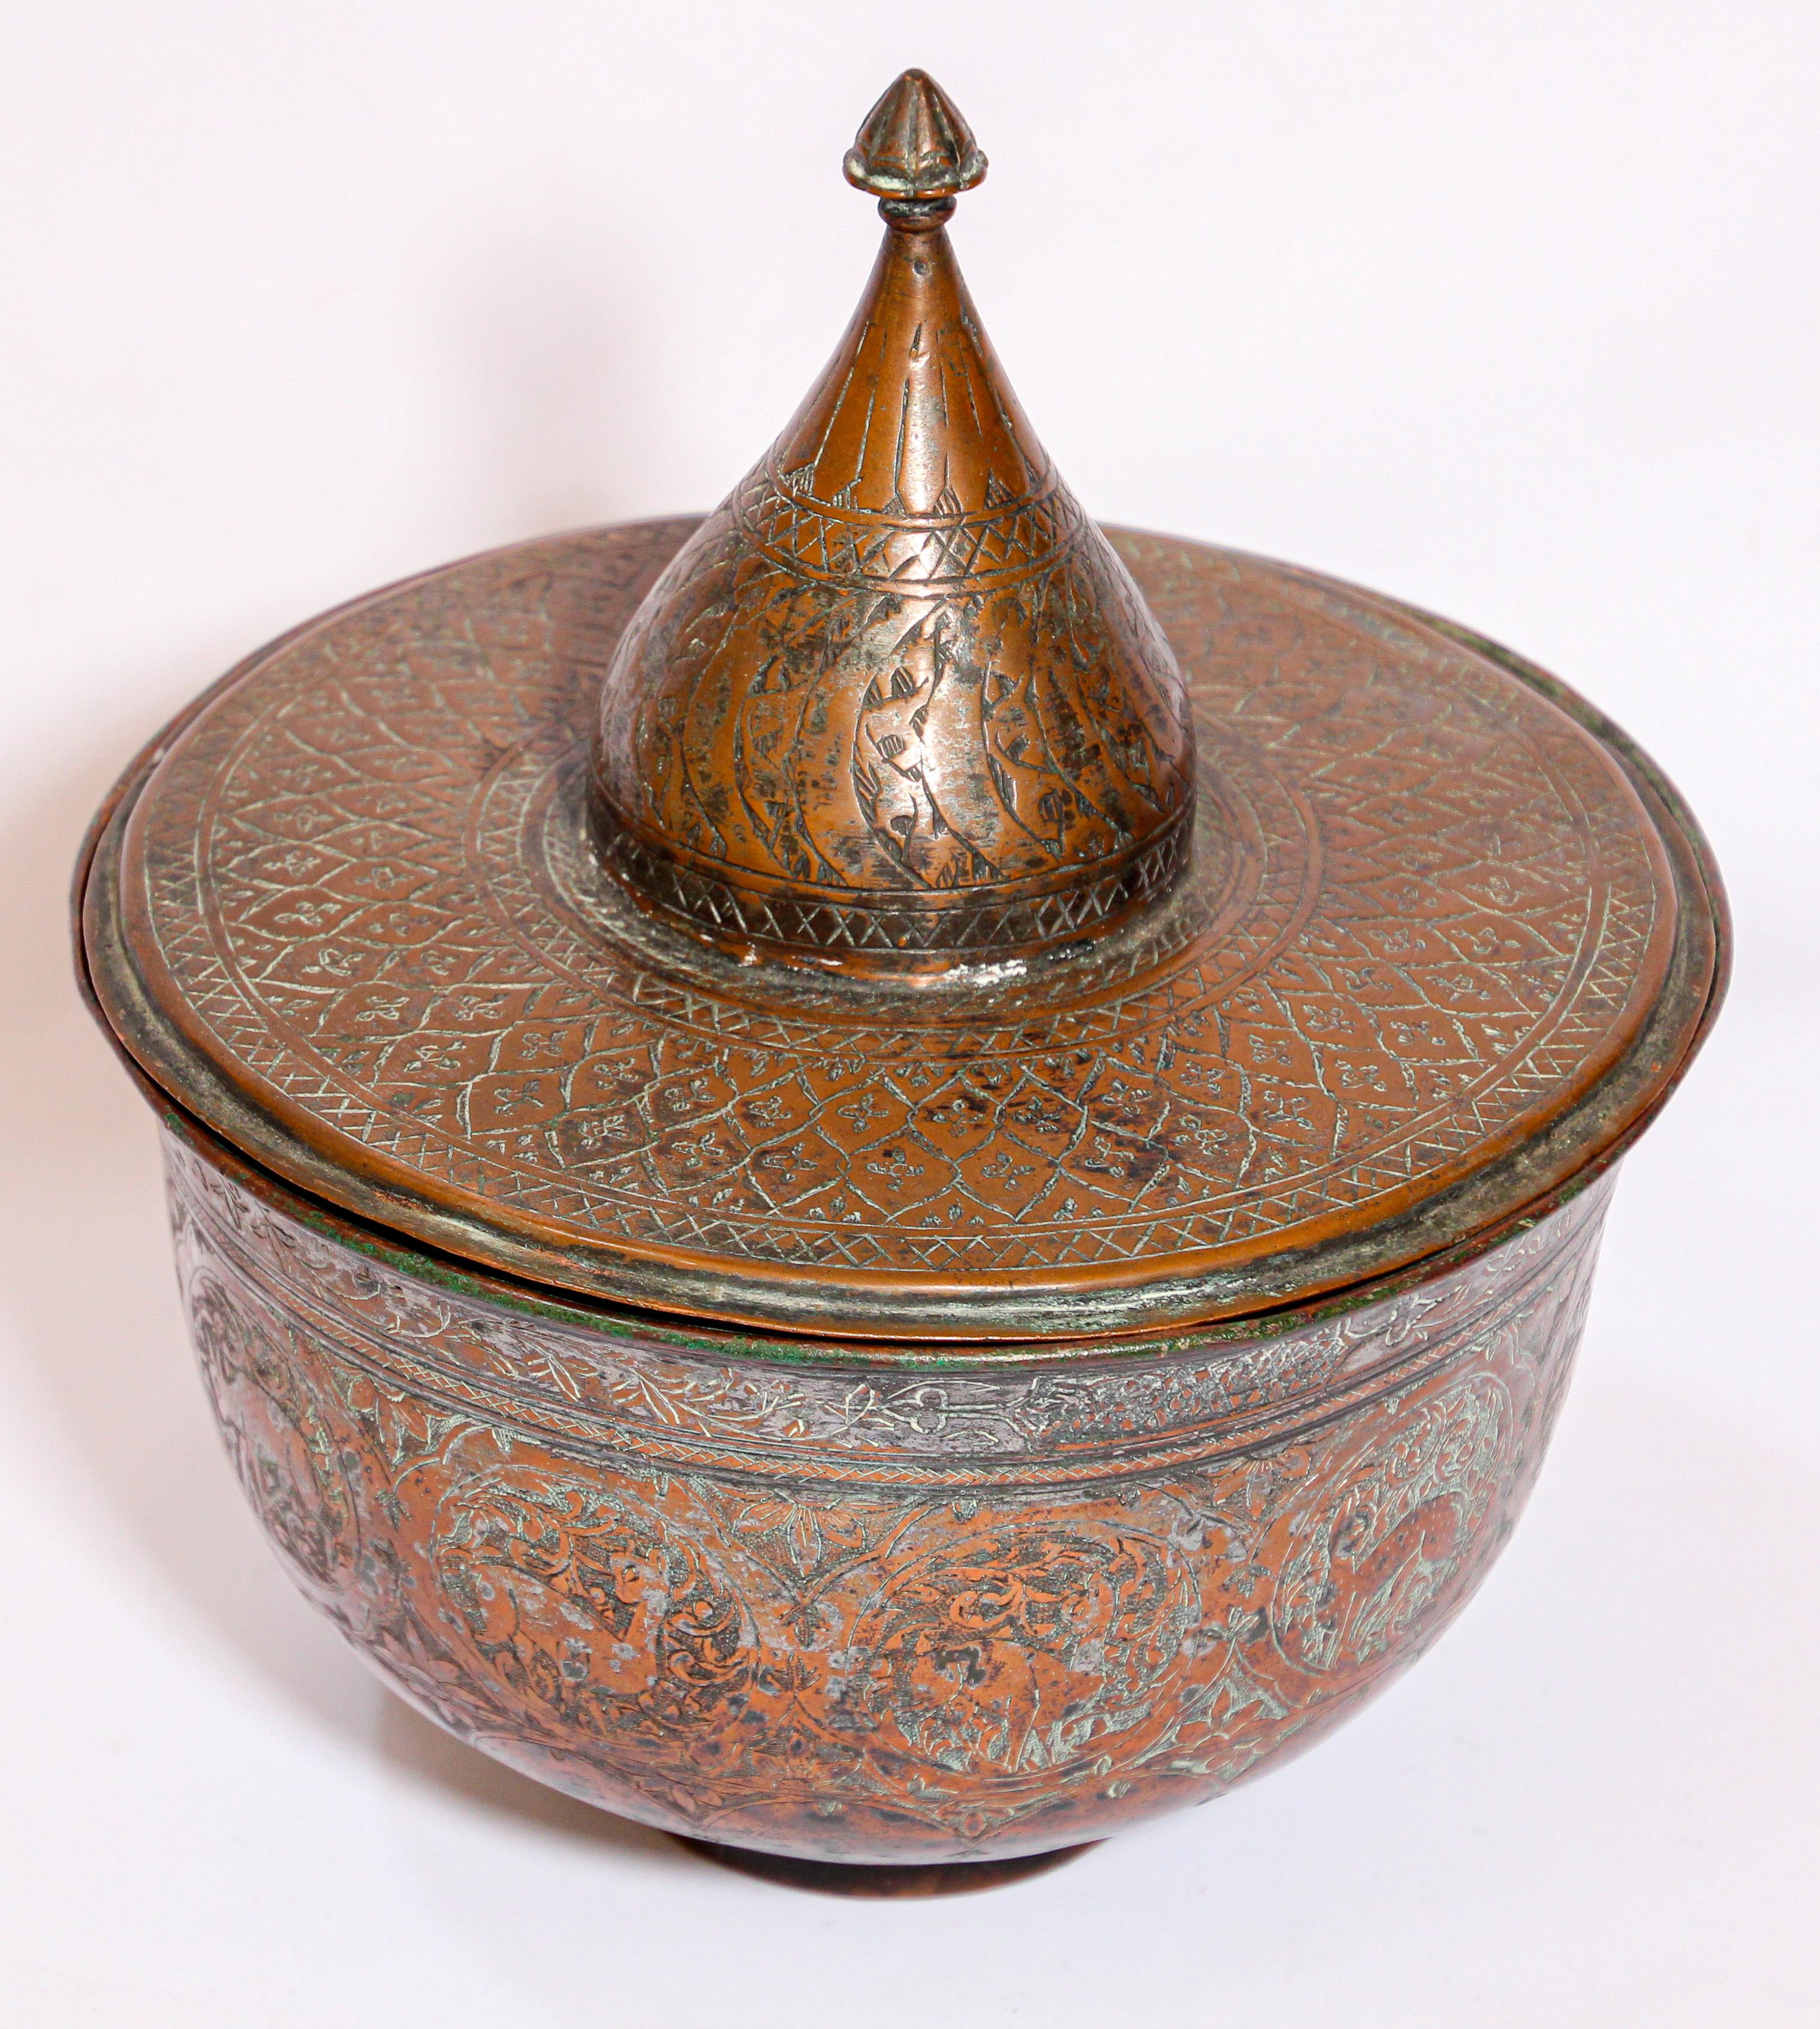 Early 19th century tinned copper Indo Persian Qajar bronzed lidded bowl.
Qajar style vessel and cover with finely executed chased design all over in the form of flowing tendrils and flowers between cartouches engraved with Islamic calligraphy and